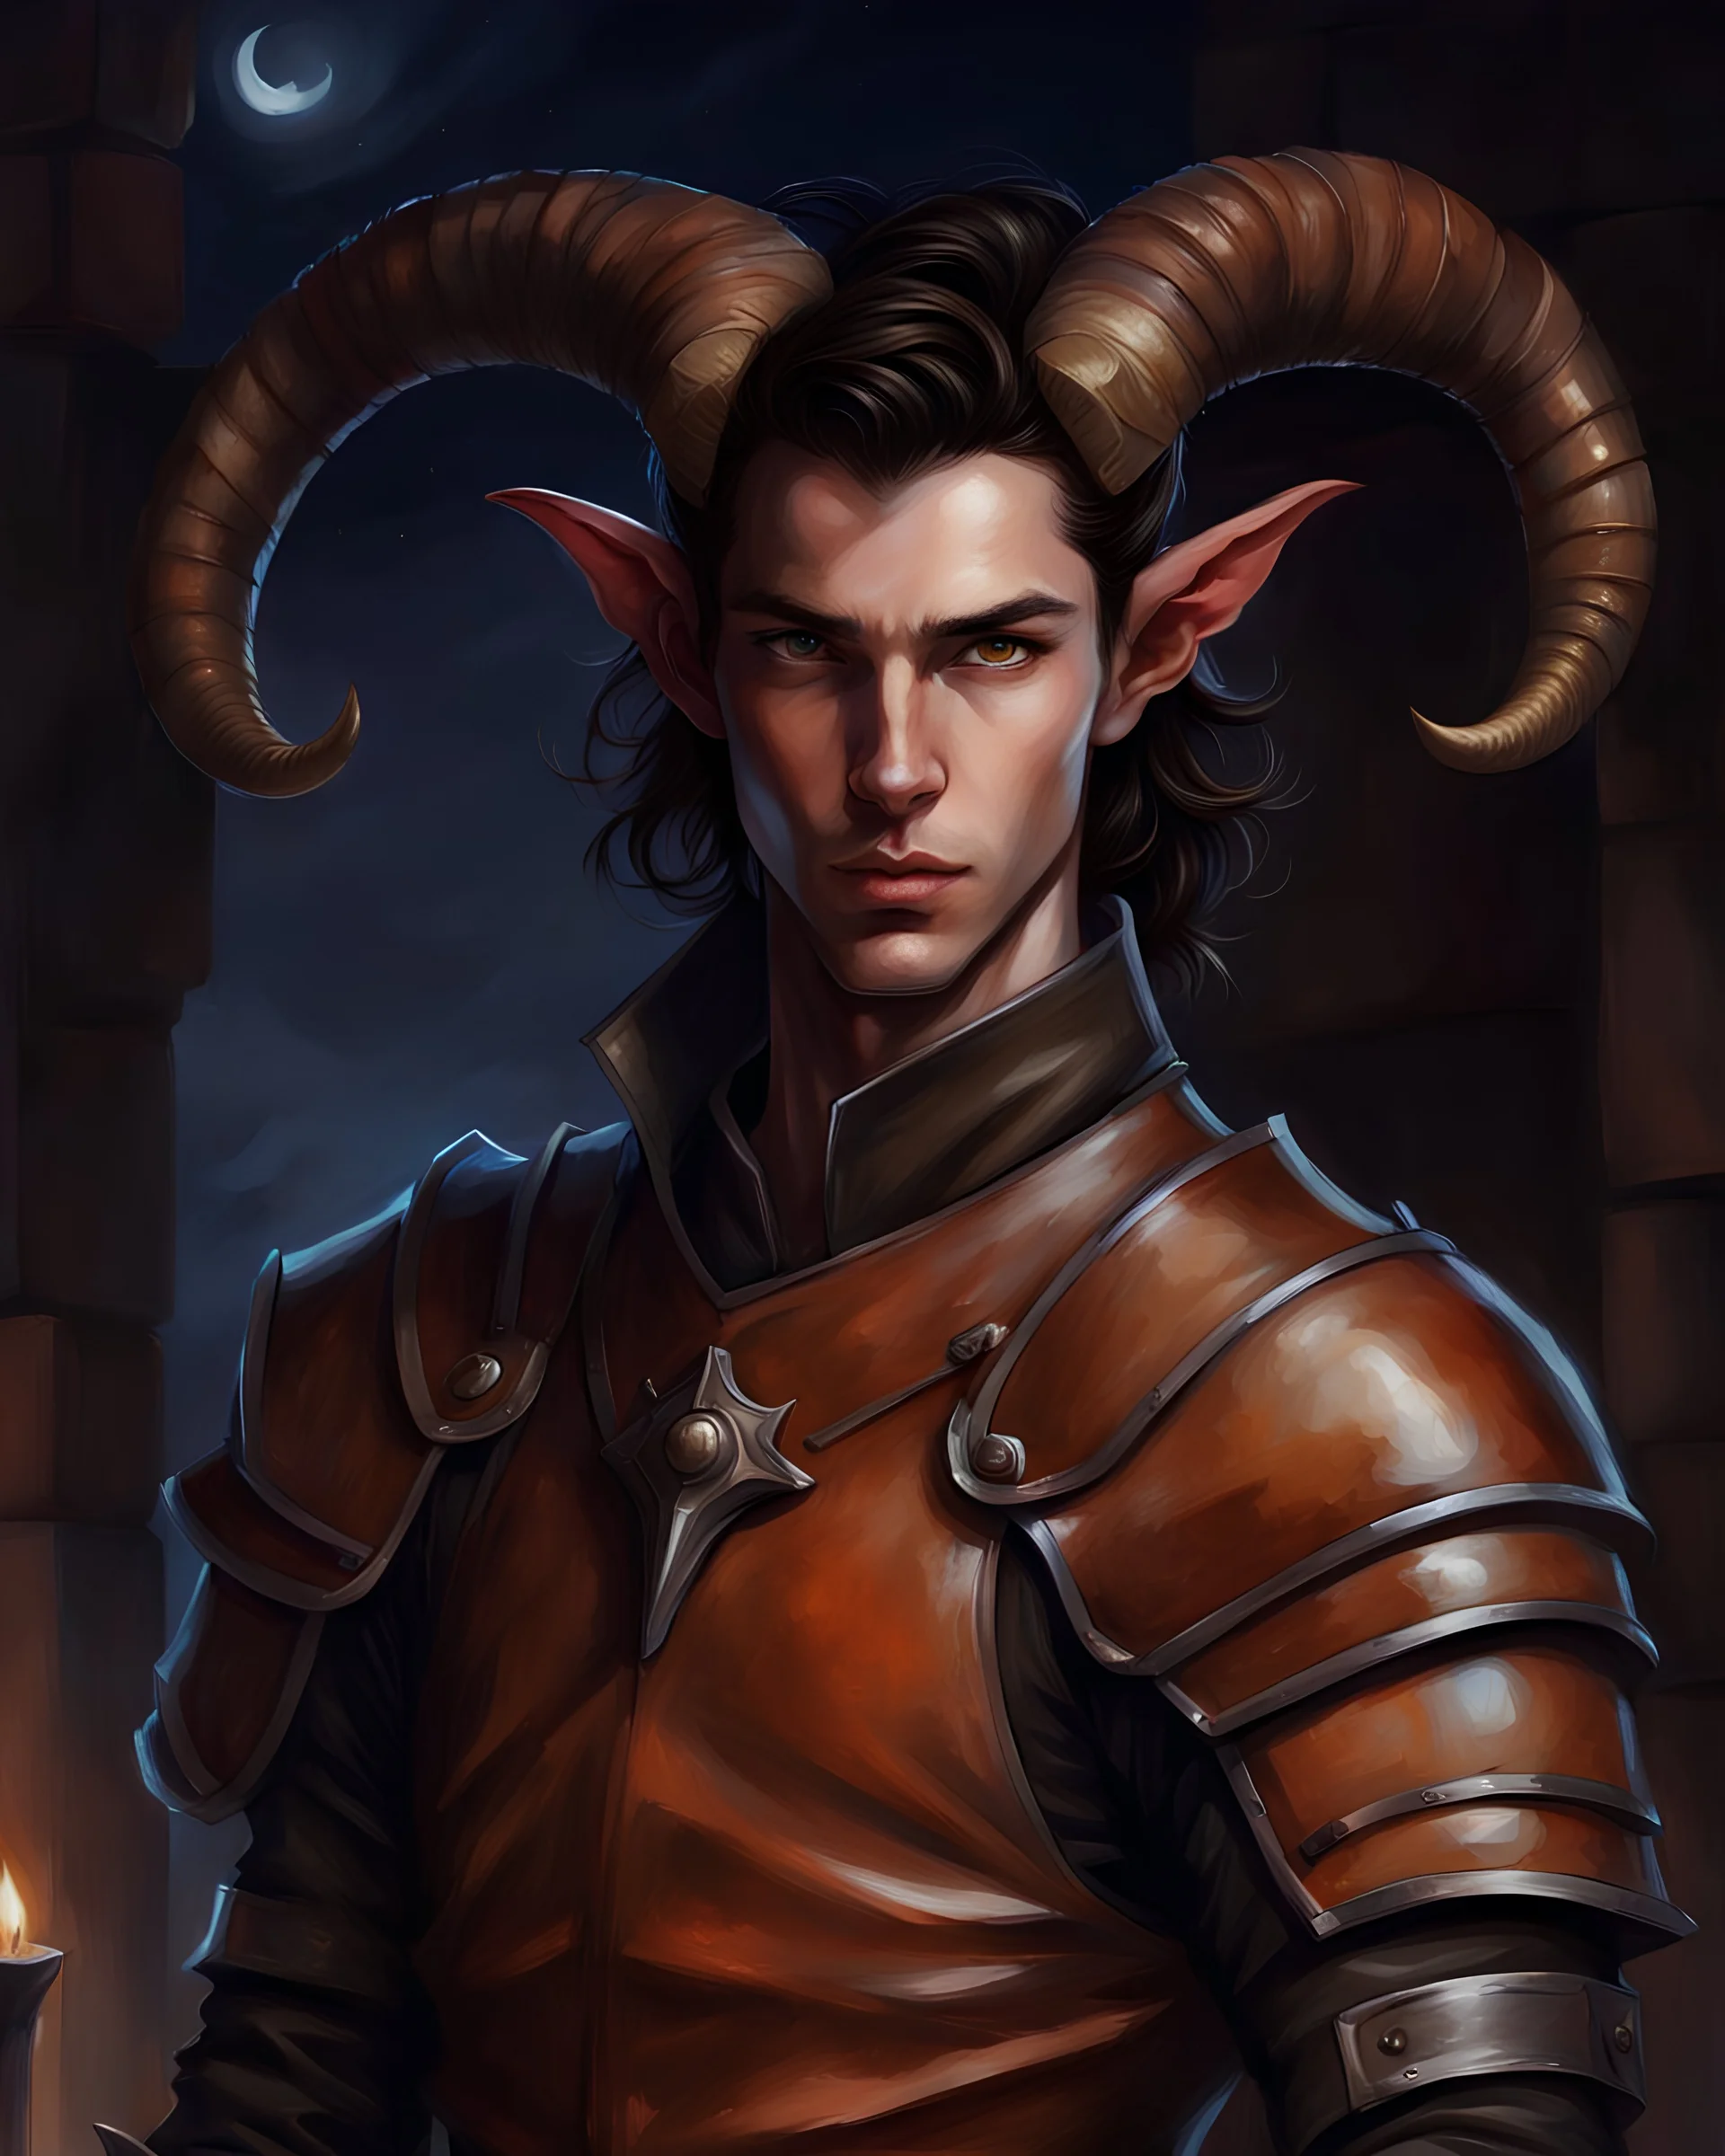 tiefling male, dark hair side parted, 18 year old, wearing detailed slick brown leather armor, slim figure, tail, side view, goat horn at the head, looking at camera, realism, painting, night